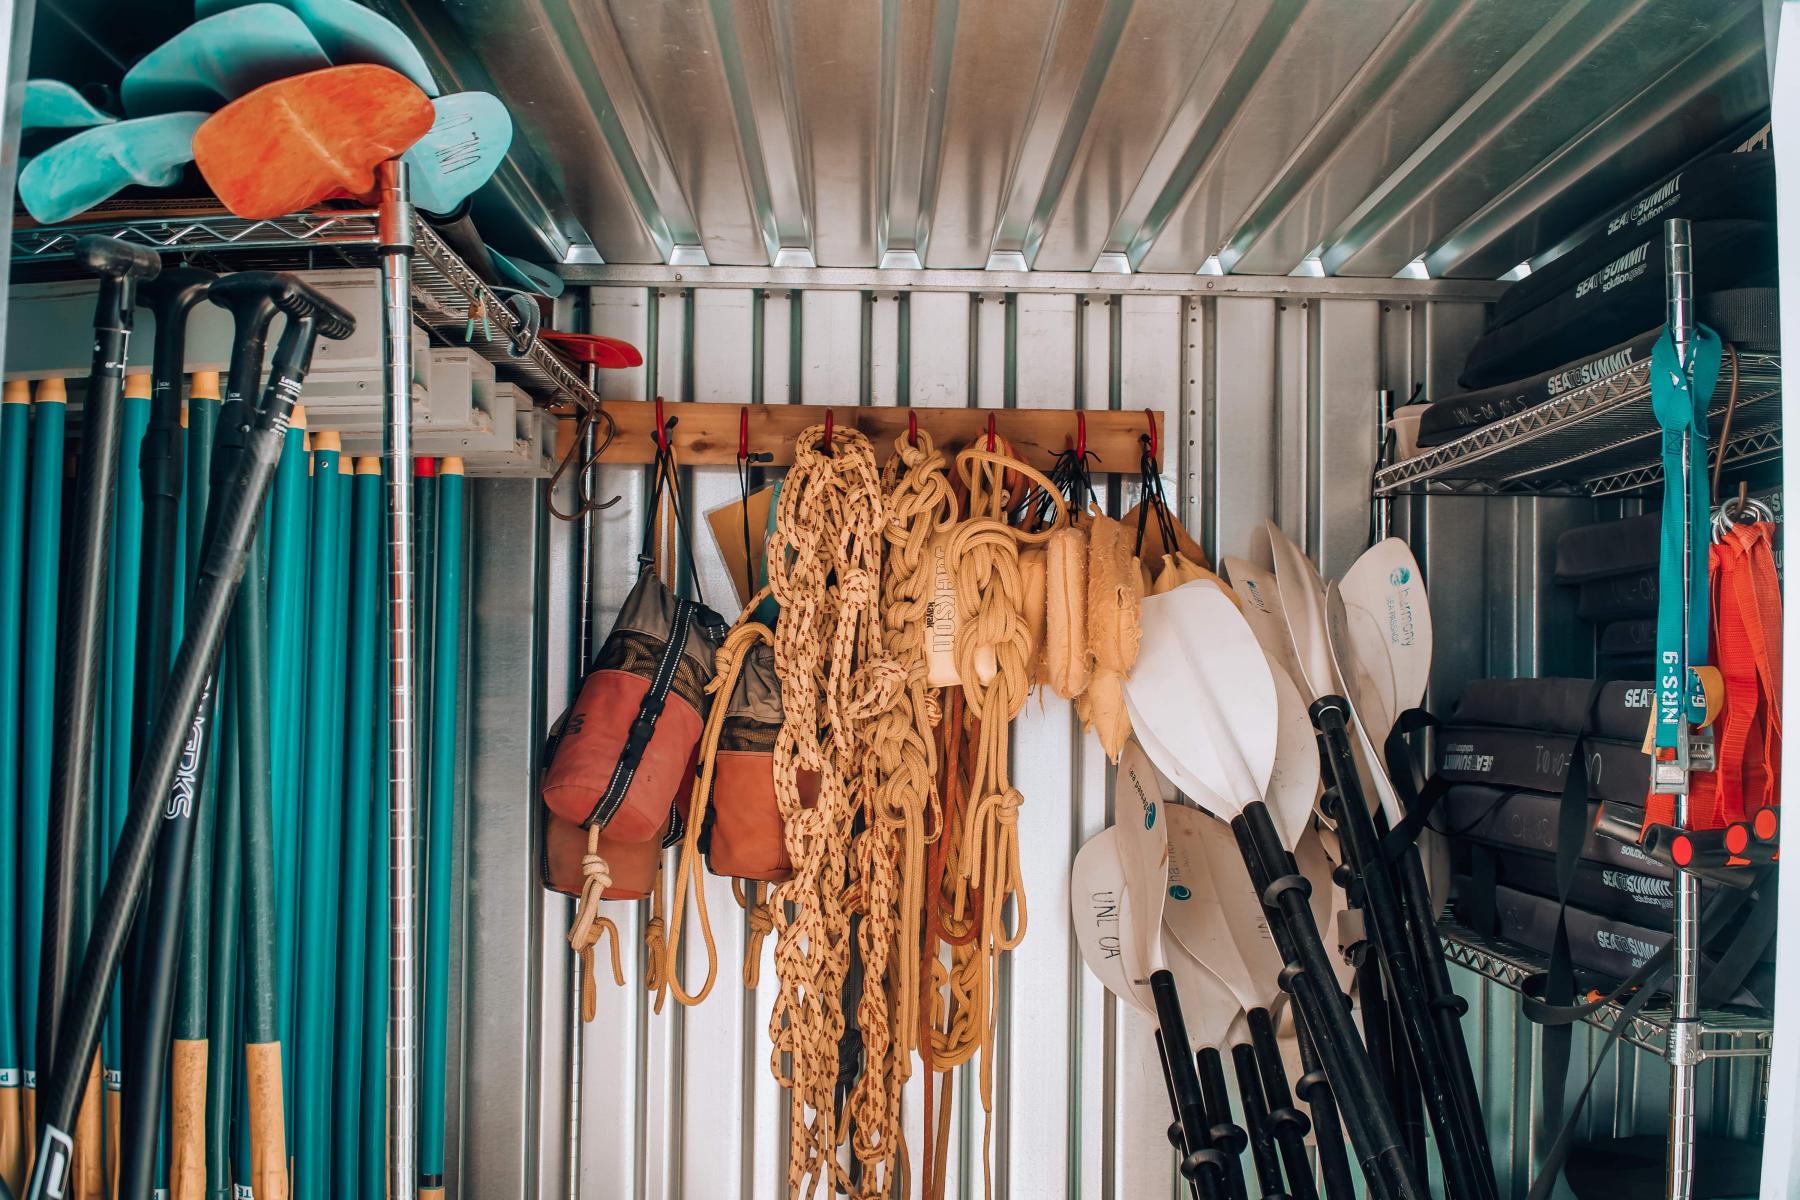 Climbing and paddling equipment stored in a container